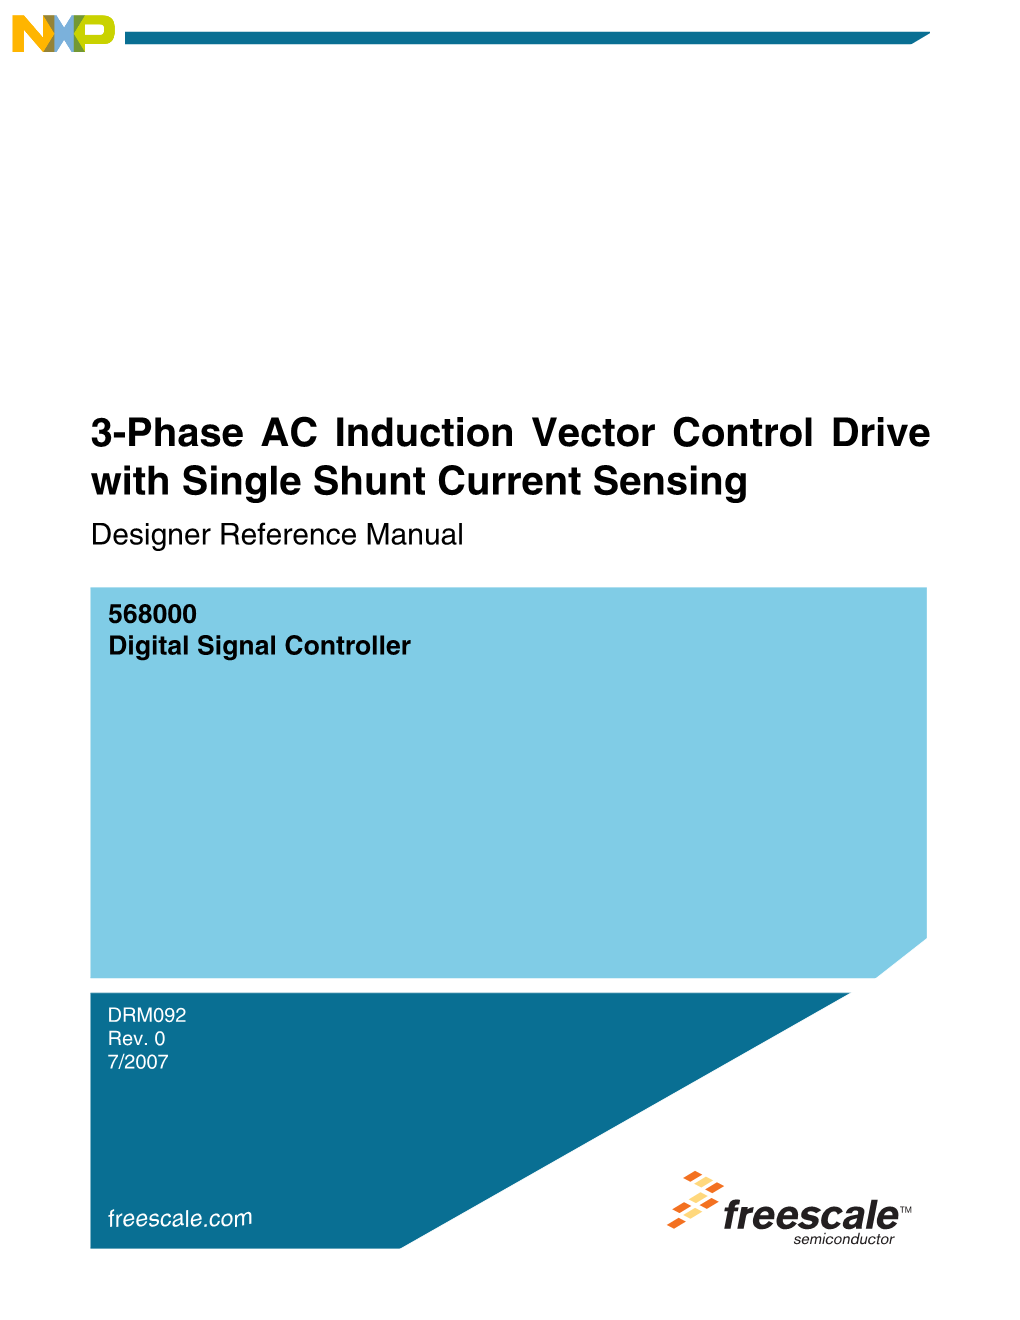 DRM092, 3-Phase AC Induction Vector Control Drive with Single Shunt Current Sensing